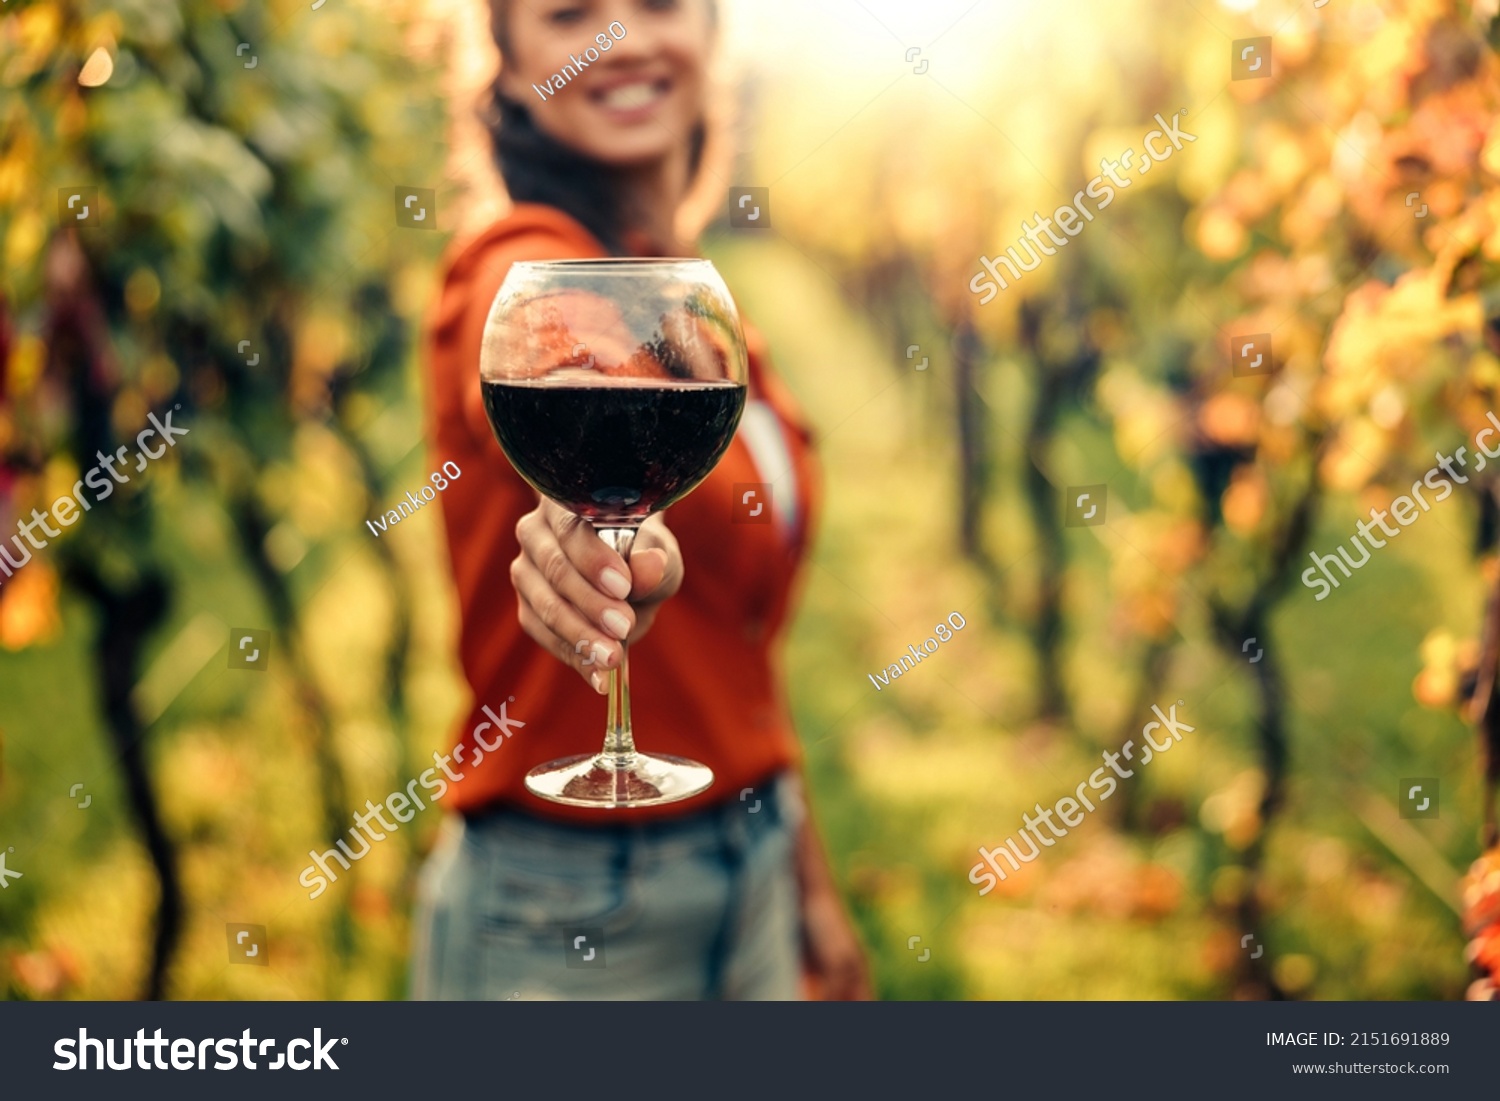 Woman tasting wine in vineyard. She is showing glass of wine to camera. #2151691889